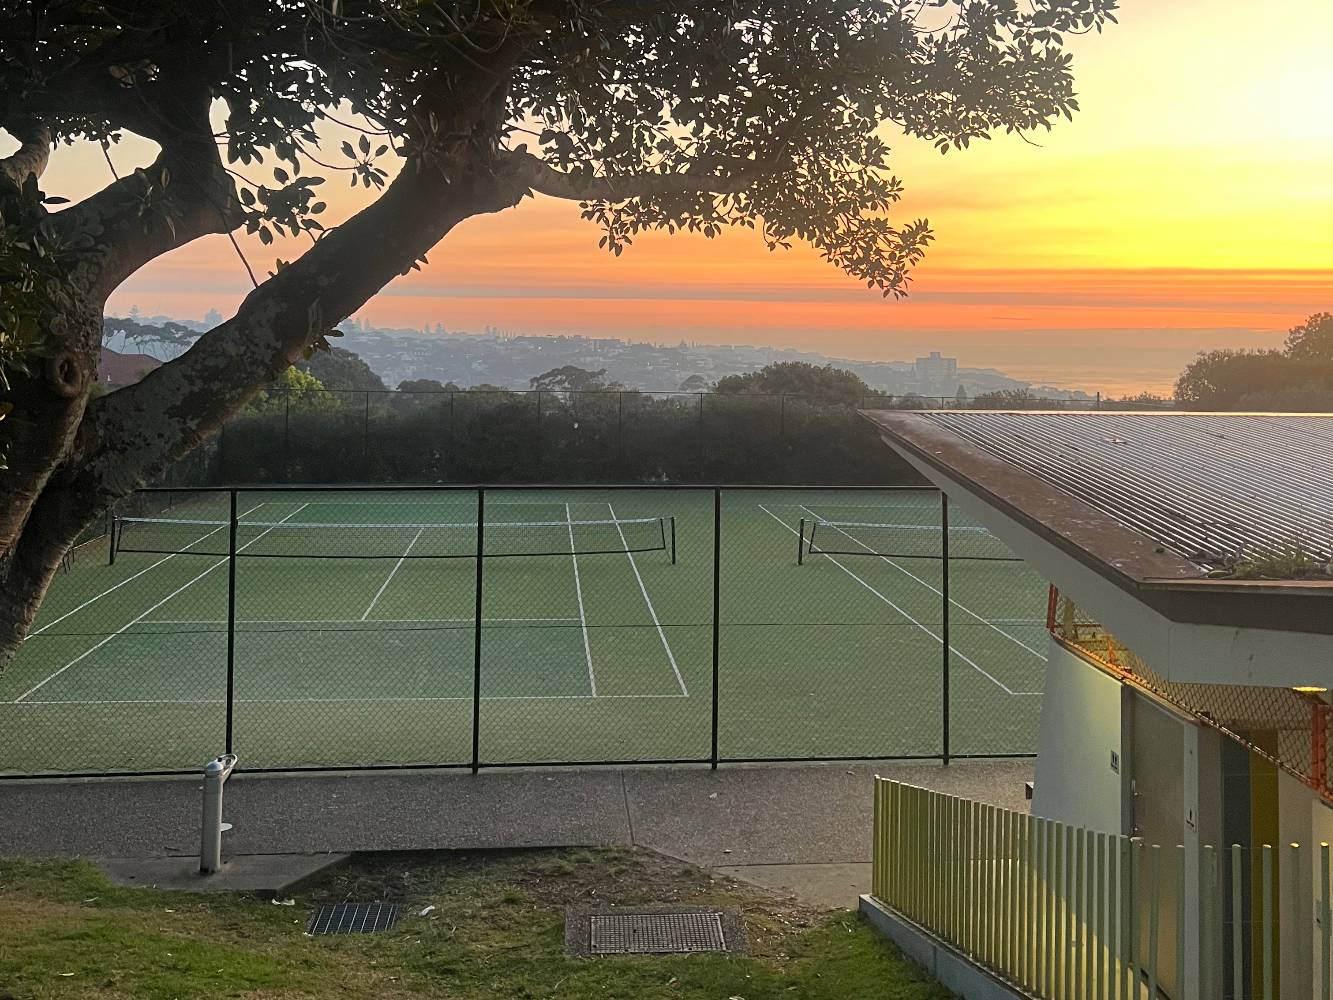 Free tennis courts opposite